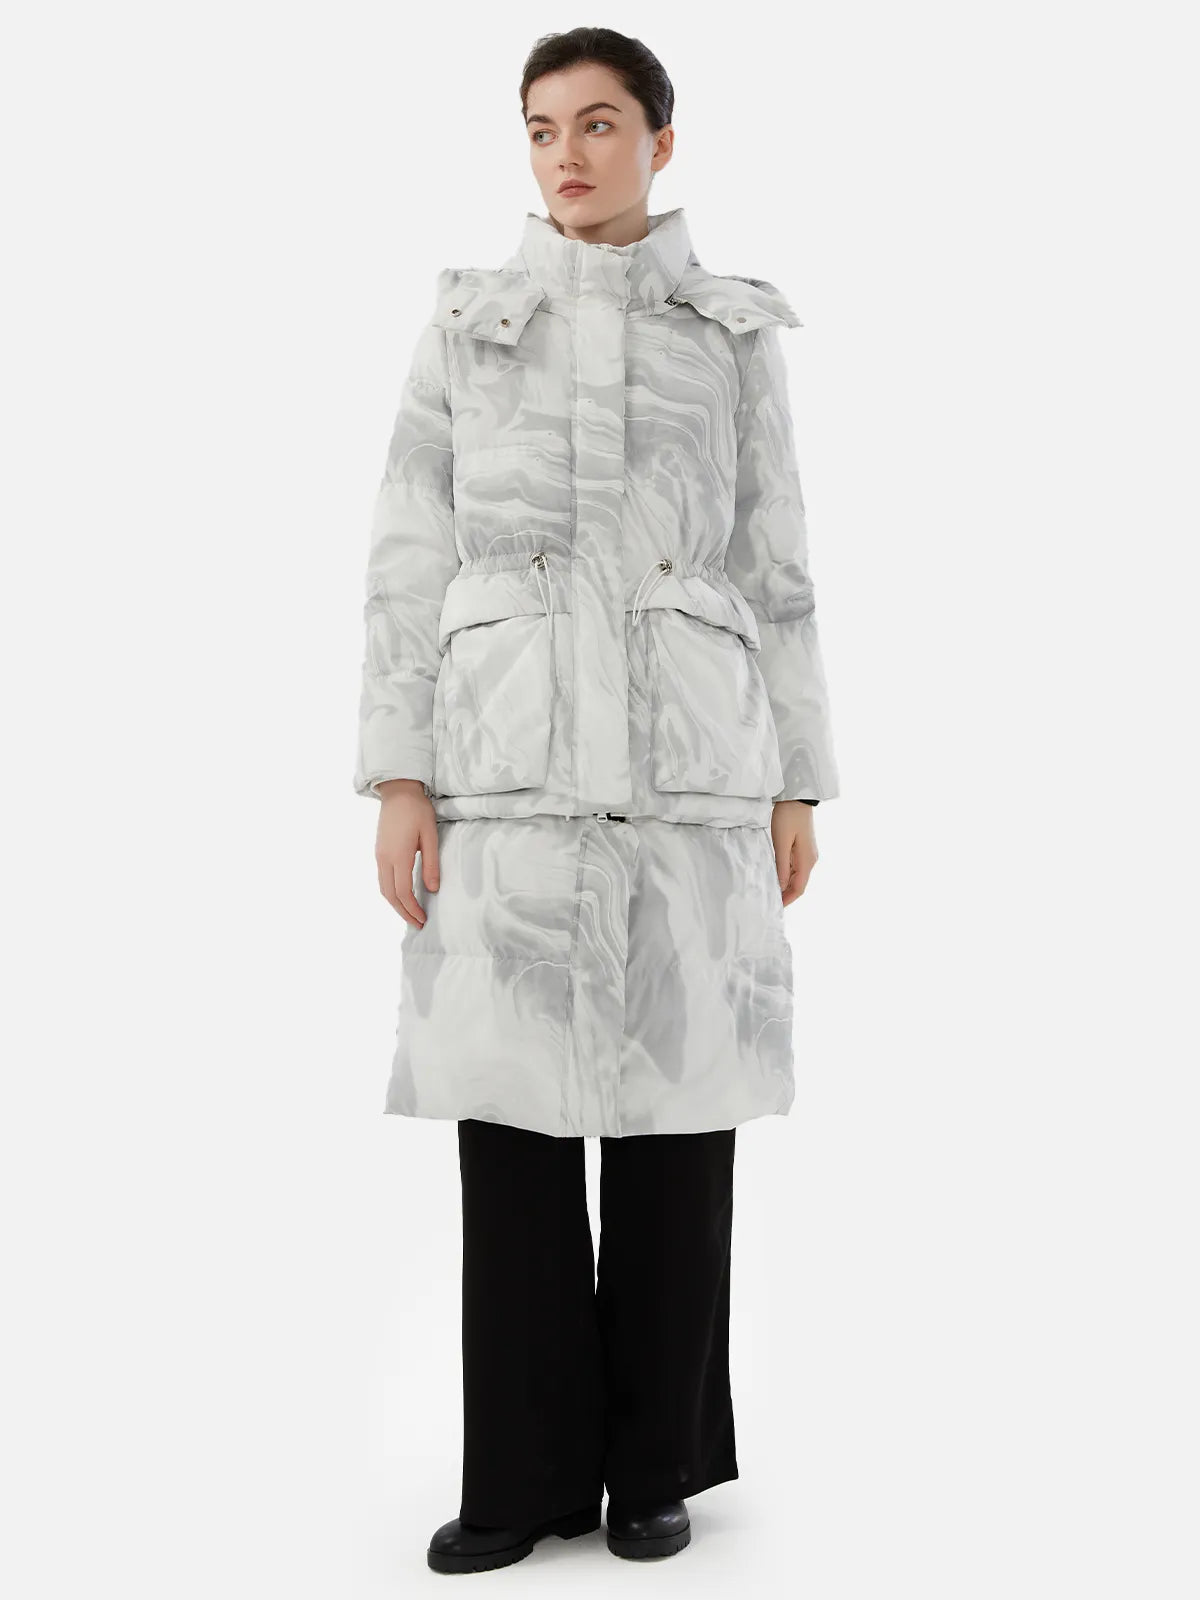 White-Grey Hooded Down Coat Convertible from Long to Short Style